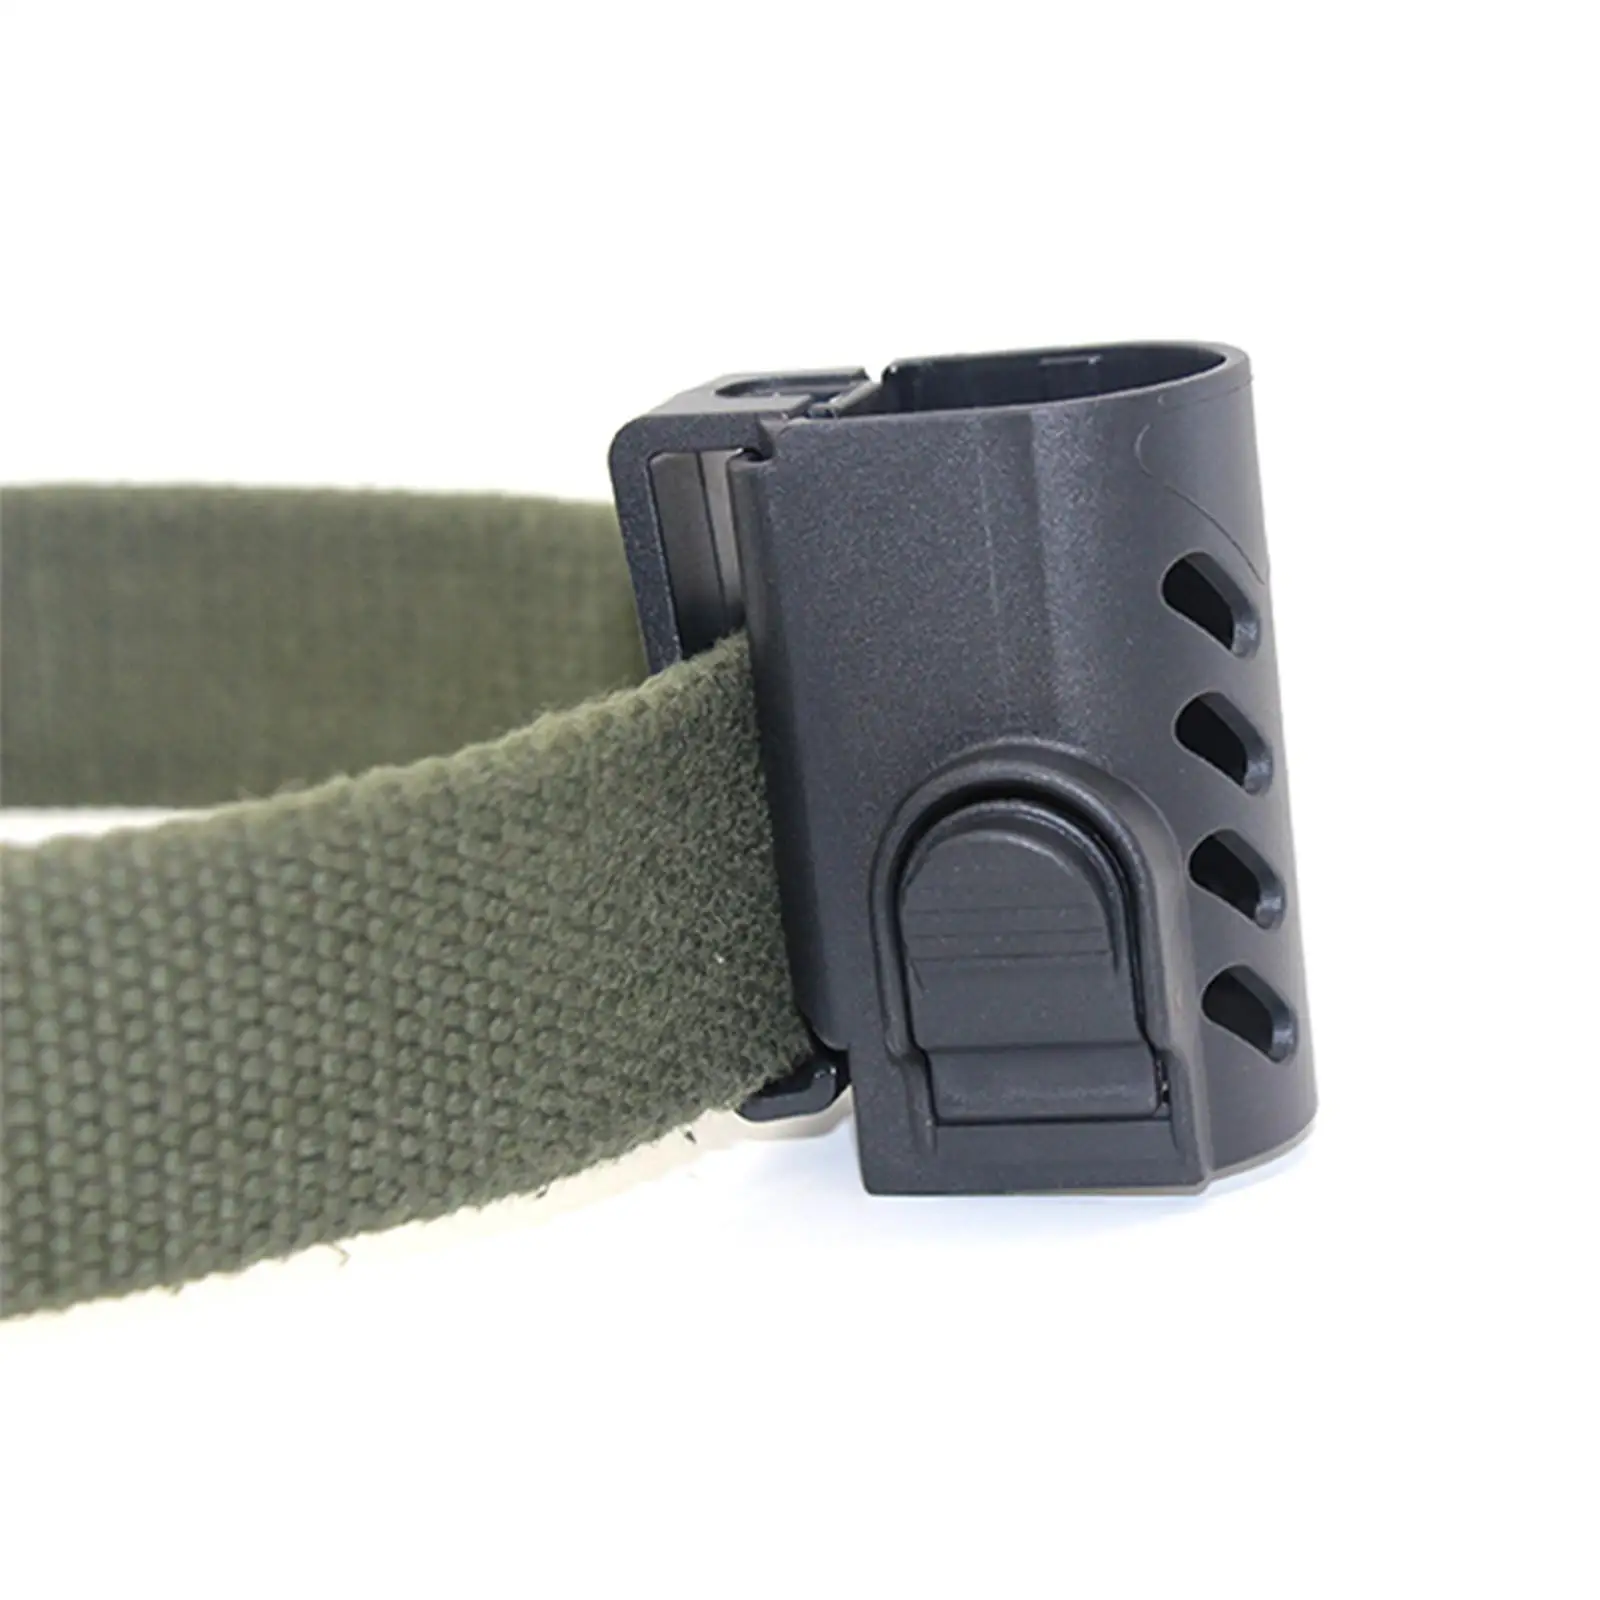 Flashlight Case Holder, Belt Clip Torch Cover Side Locks Protective Side Lock Easy to Install with Belt Holder for Outdoor